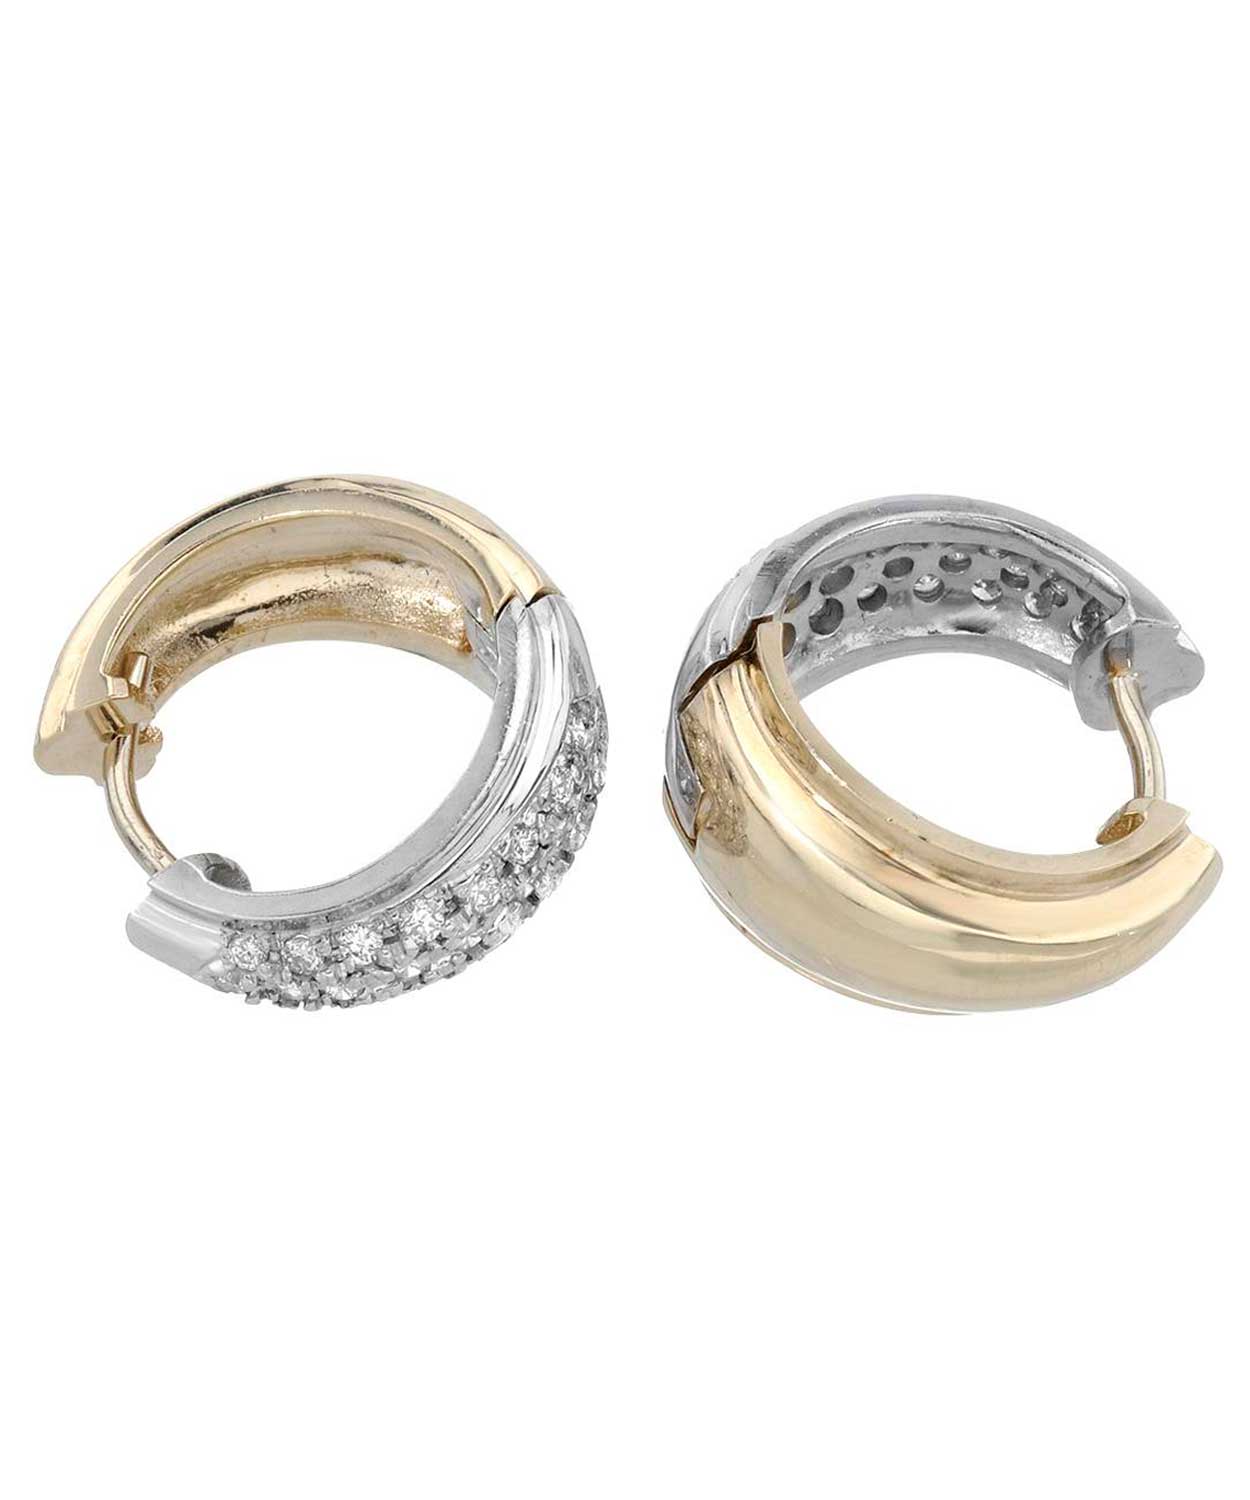 Allure Collection 0.68 ctw Diamond 14k Two-Tone Gold Huggie Earrings View 2